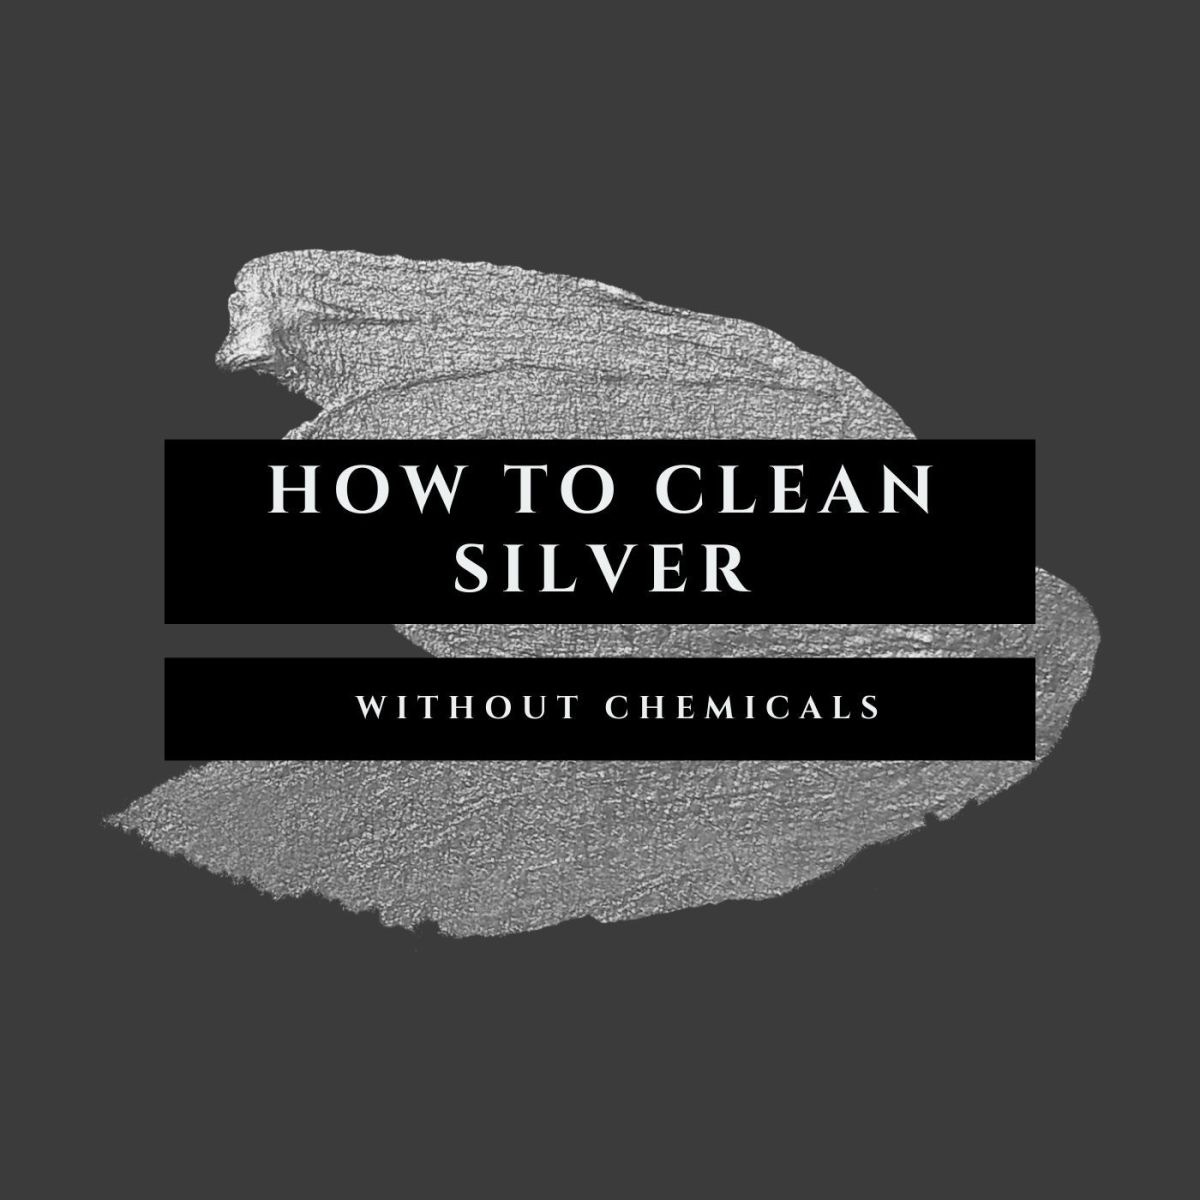 Read on to learn how to effectively clean silver using simple store-bought items like vinegar and bicarbonate of soda.